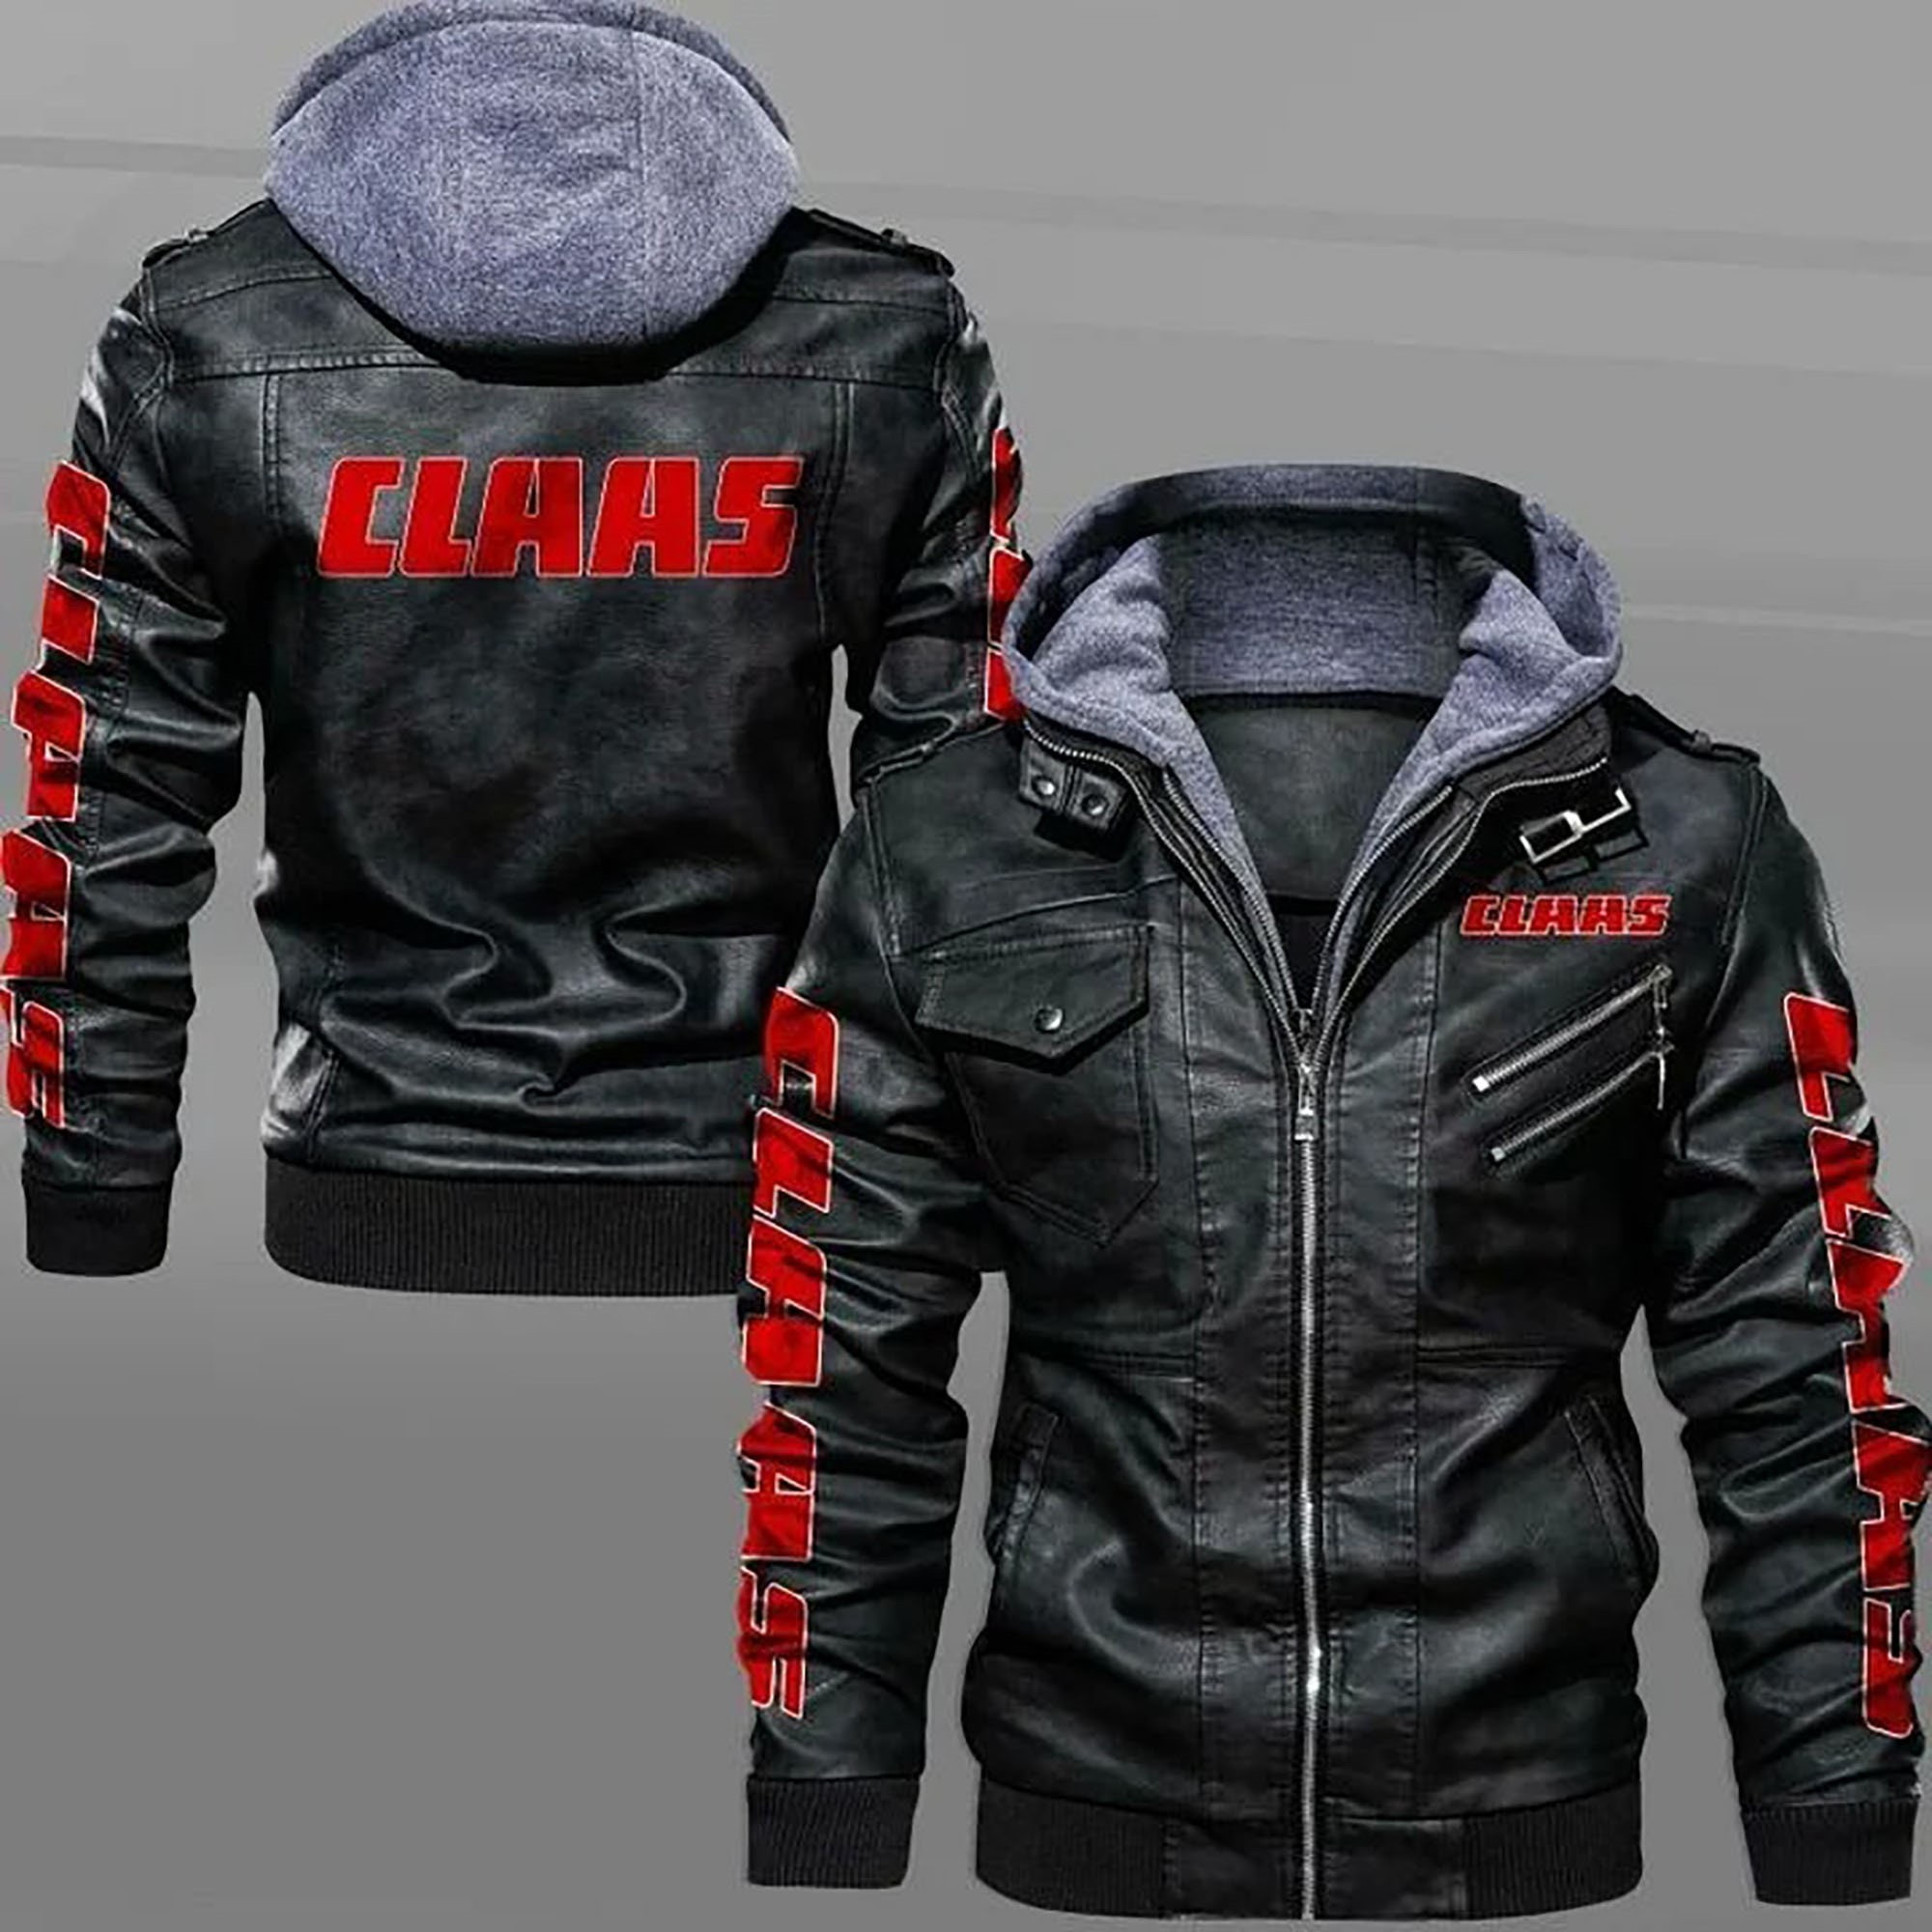 These Amazing Leather Jacket will add to the appeal of your outfit 455